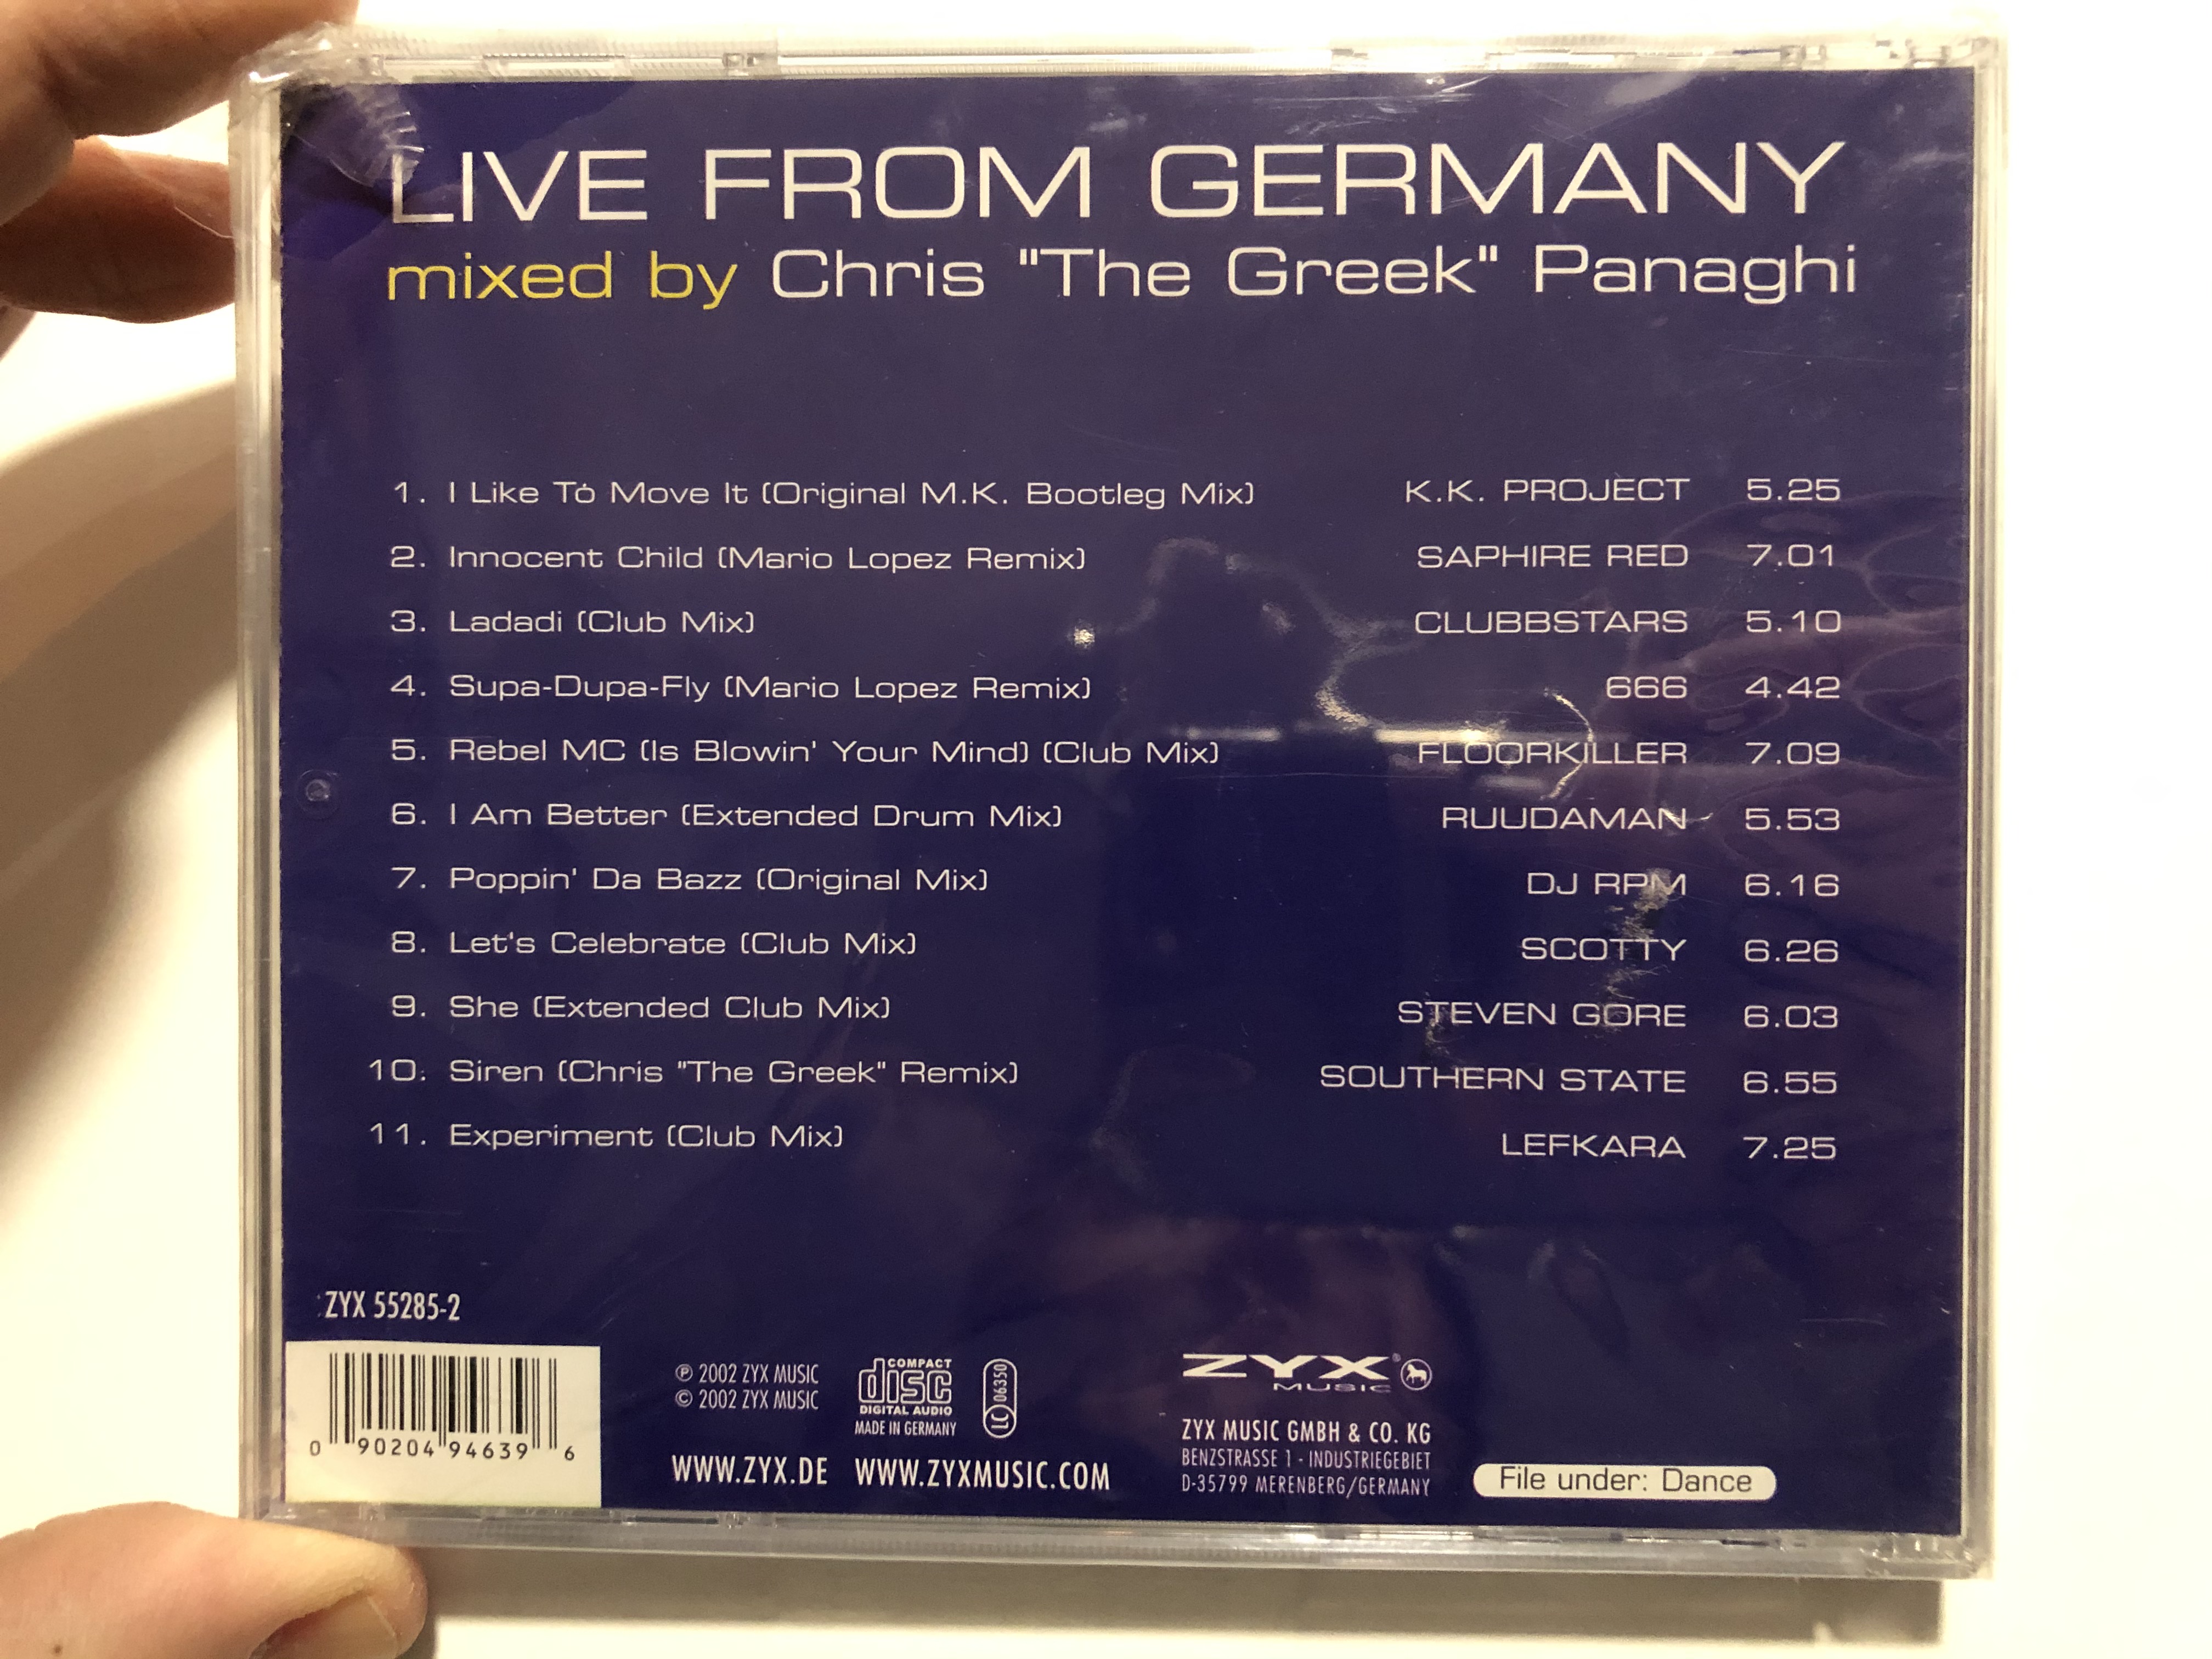 live-from-germany-mixed-by-chris-the-greek-zyx-music-audio-cd-2002-zyx-55285-2-2-.jpg